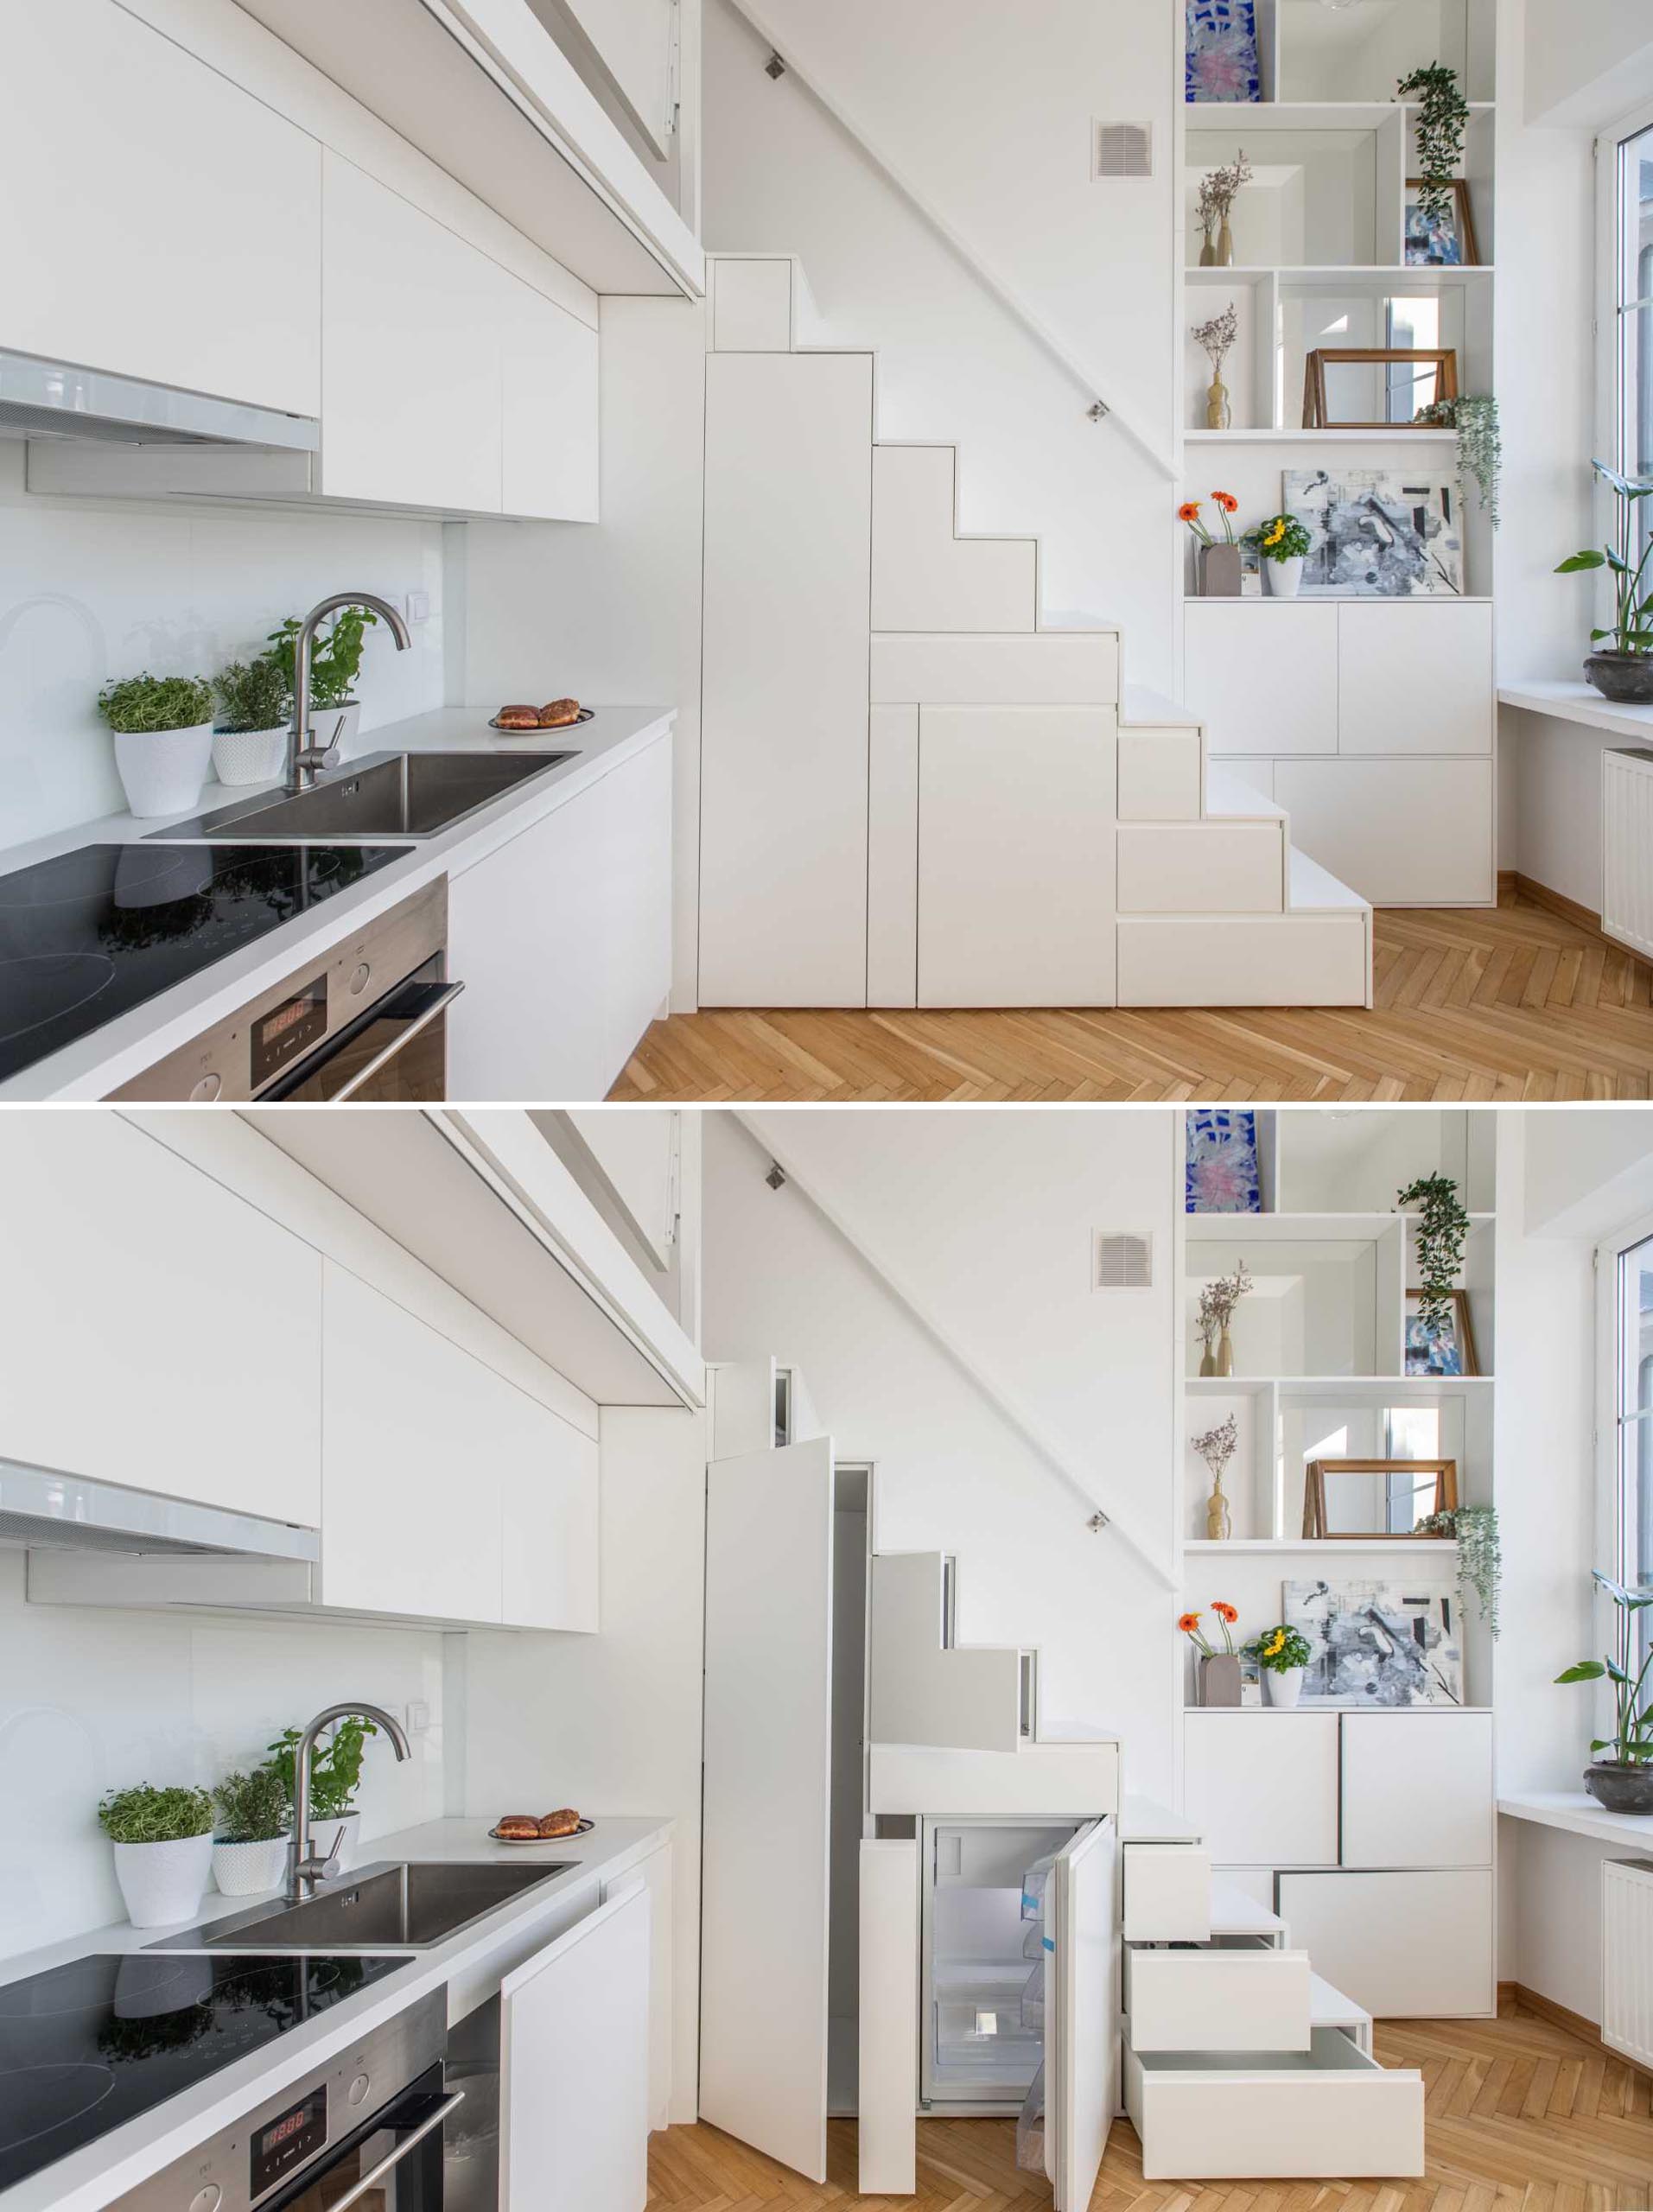 A pantry, drawers, and a small fridge are also included within the cabinets under the stairs.